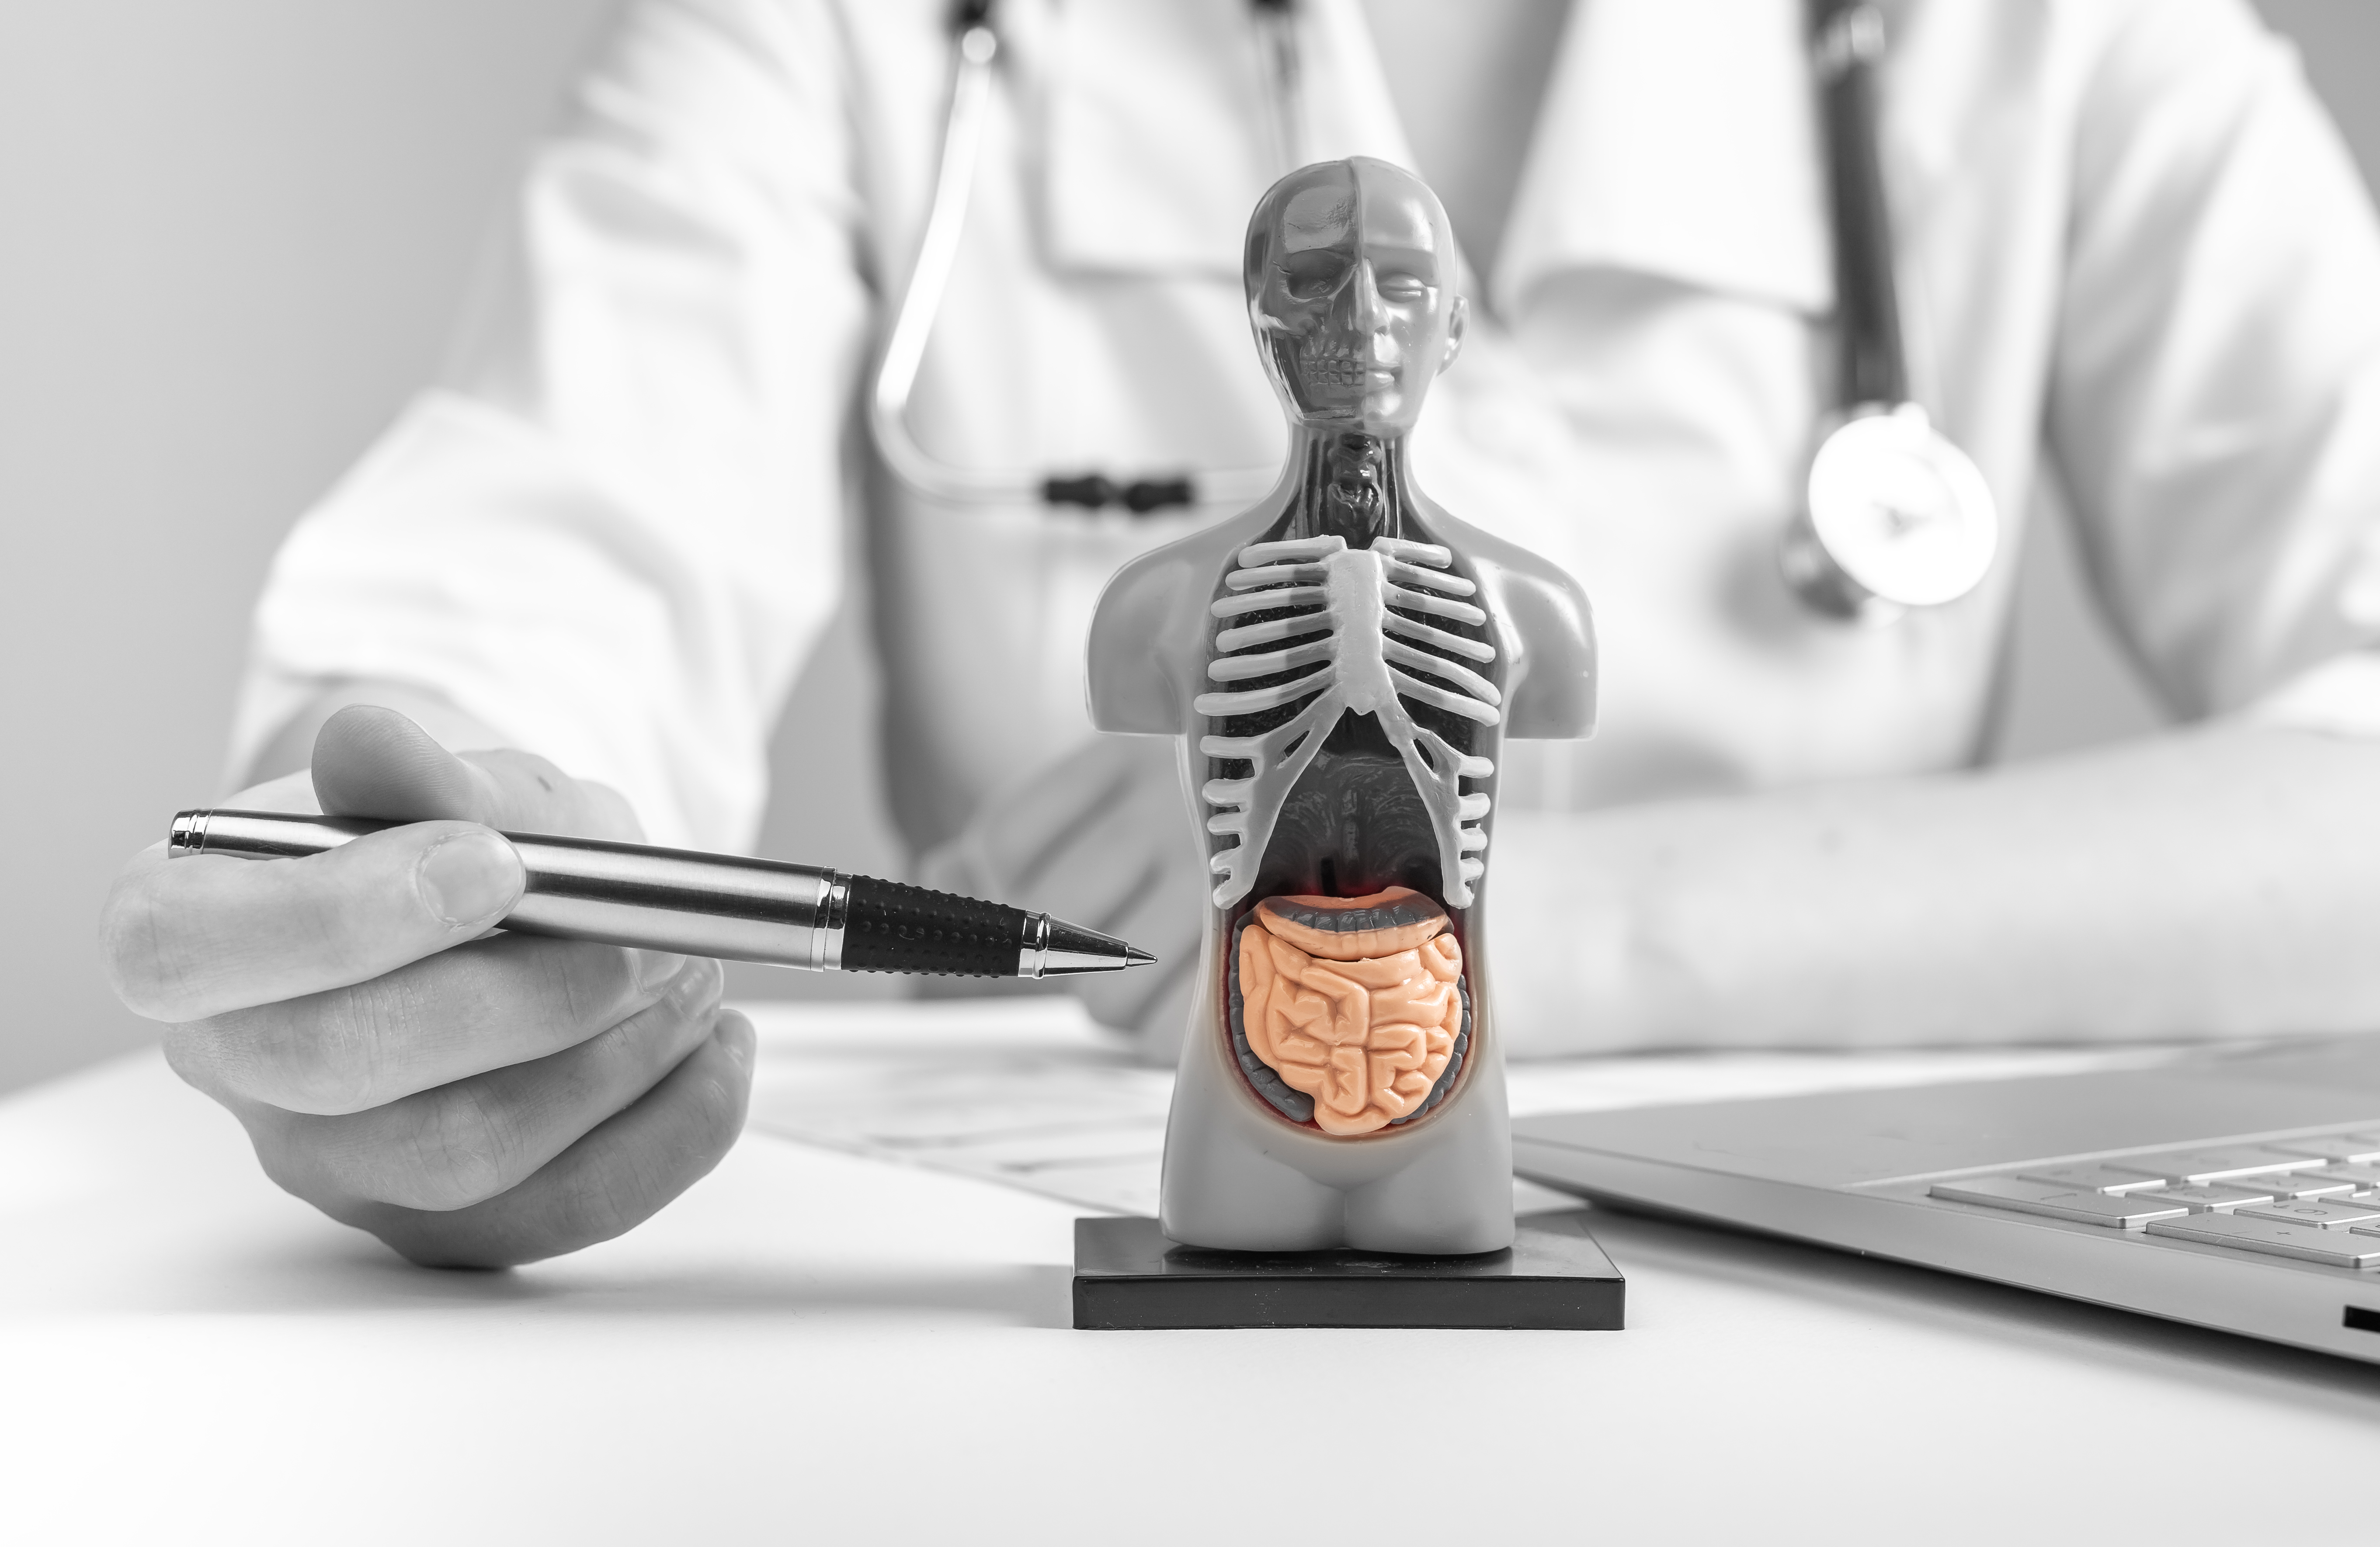 doctor-showing-internal-organs-3d-human-model-woman-with-stethoscope-lab-coat-sitting-desk-with-laptop-anatomy-online-medical-education-concept-black-white